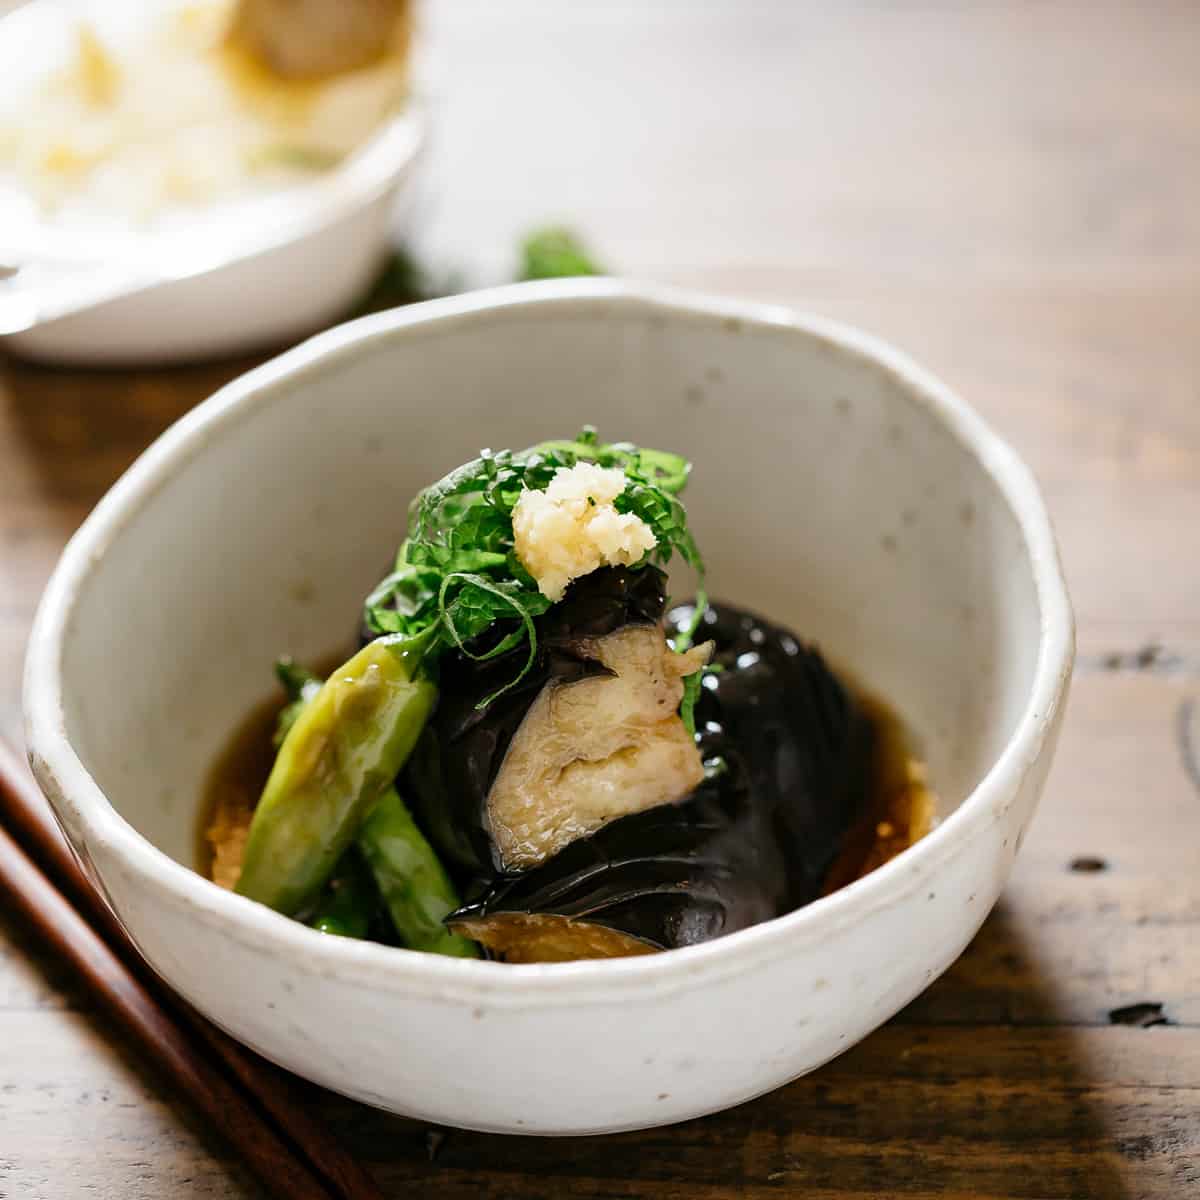 Japanese eggplant recipe agebitashi is served in a round shallow bowl